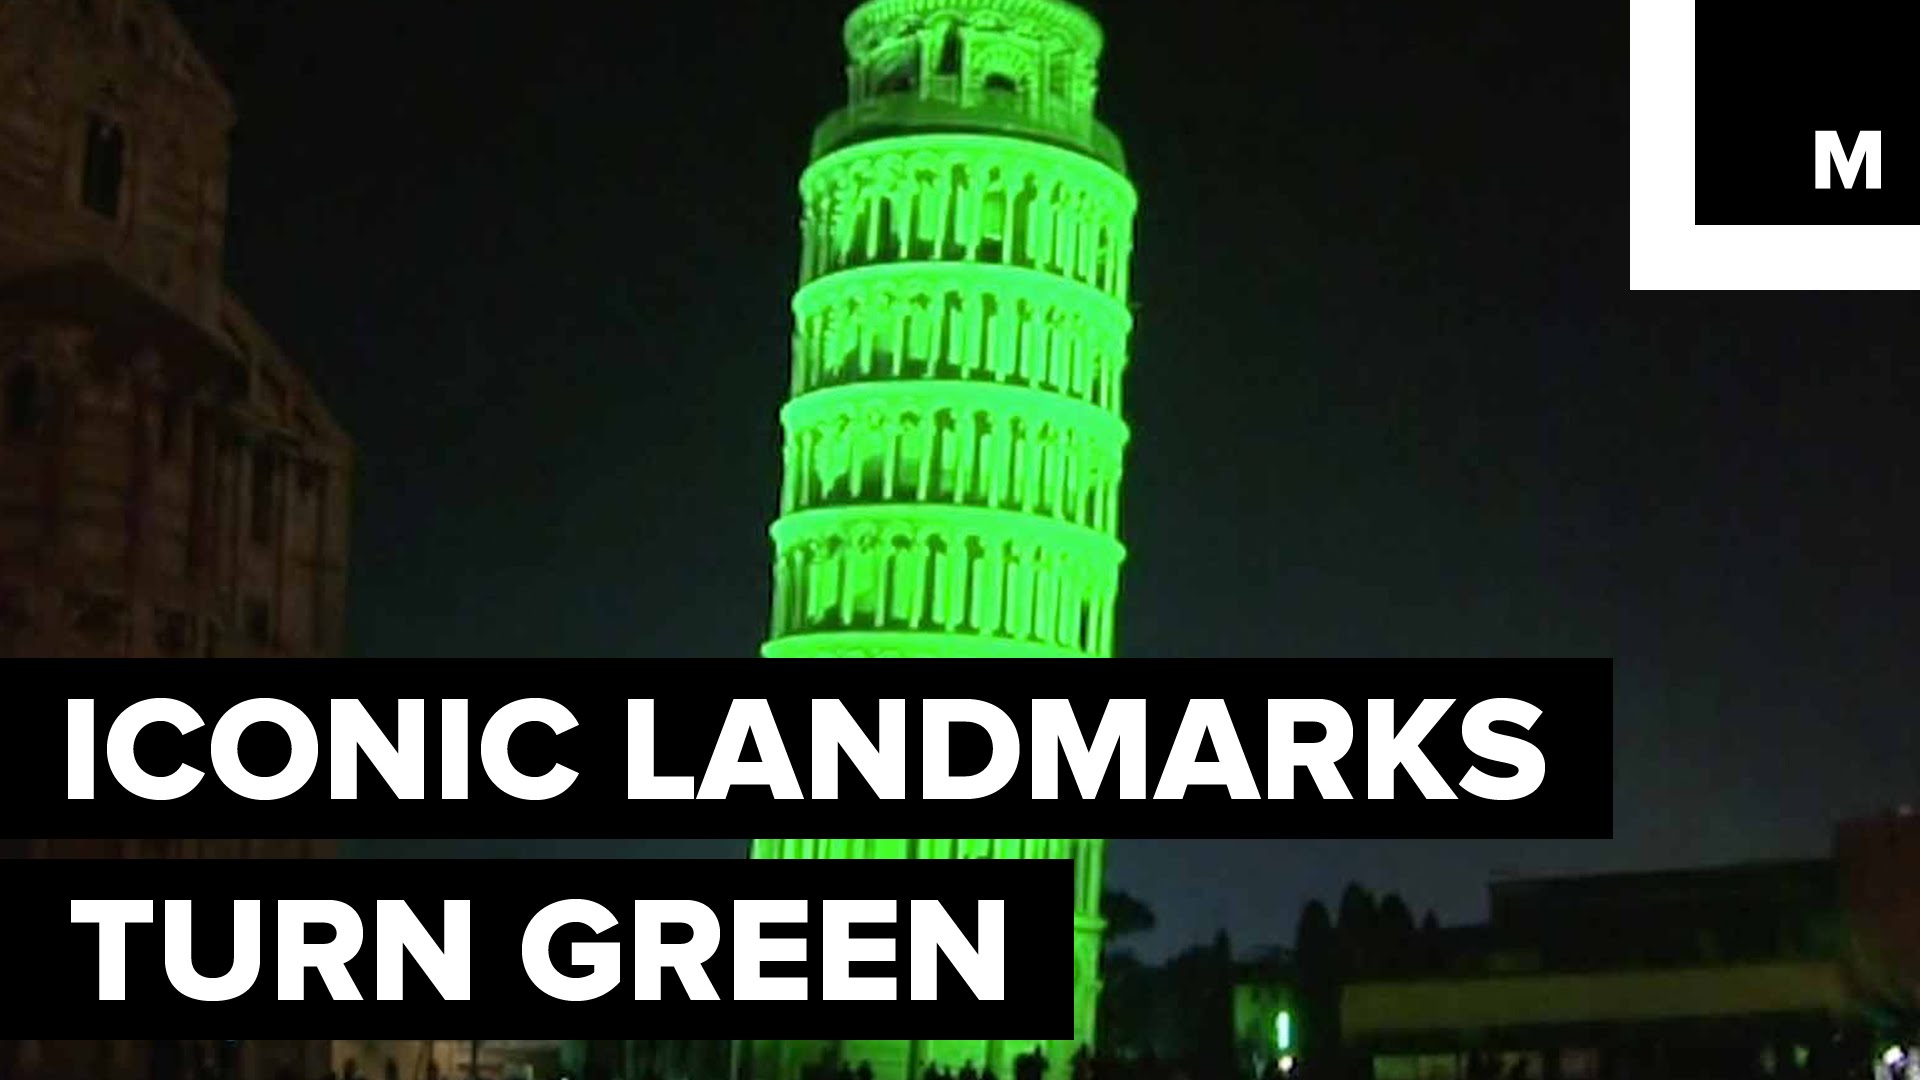 The World's Most Famous Landmarks Go Green for St. Patrick's Day ...